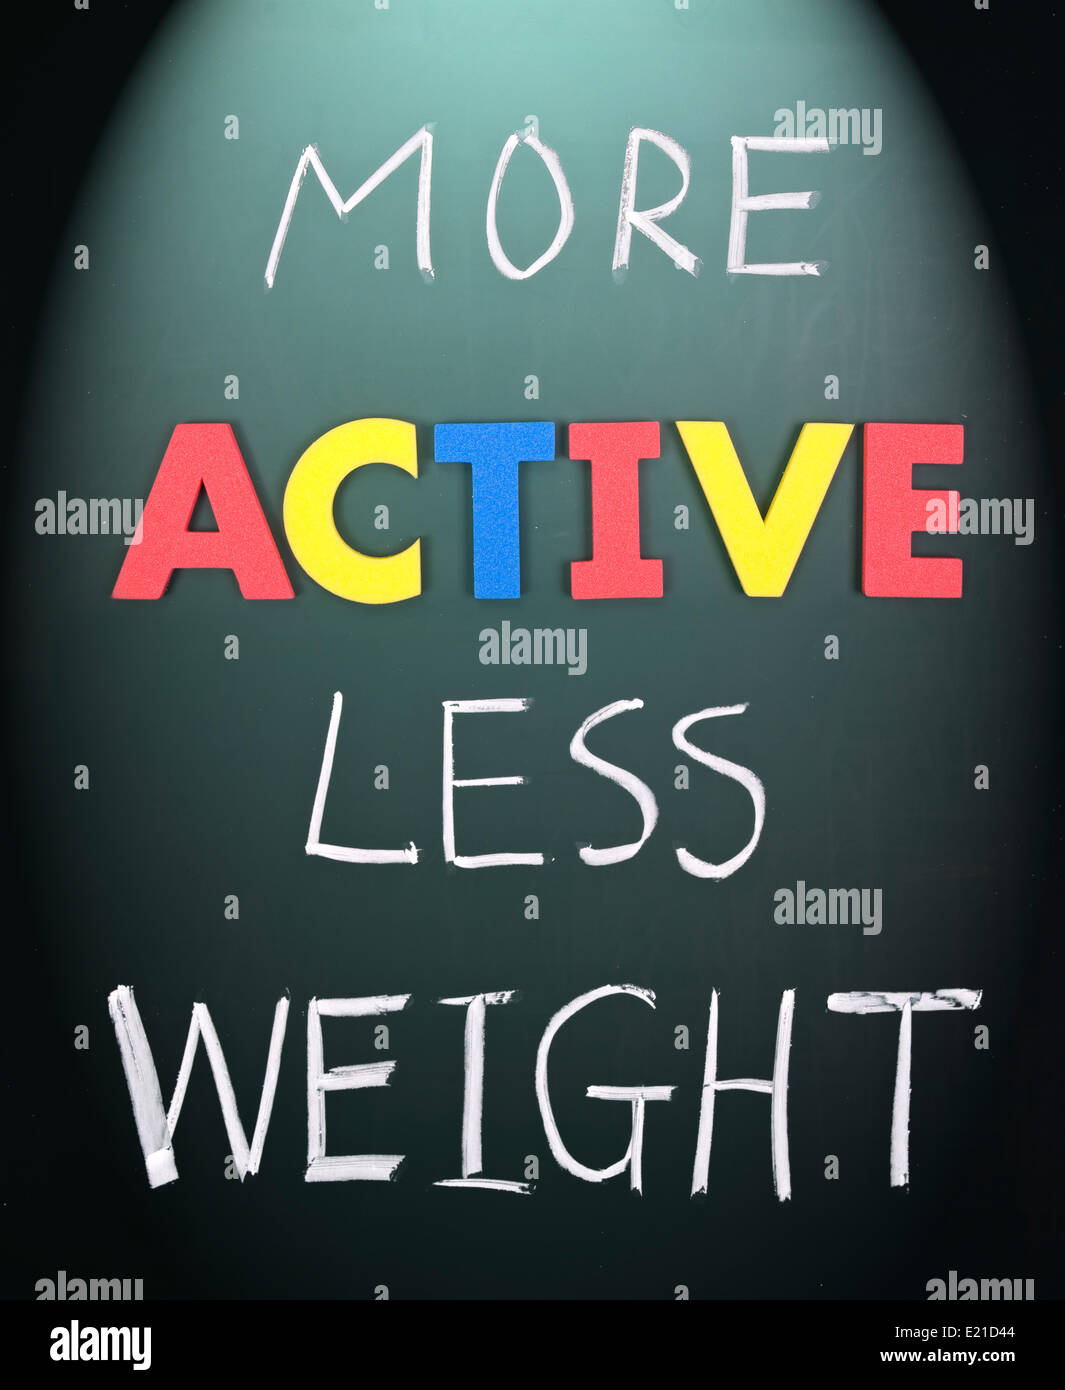 Less active